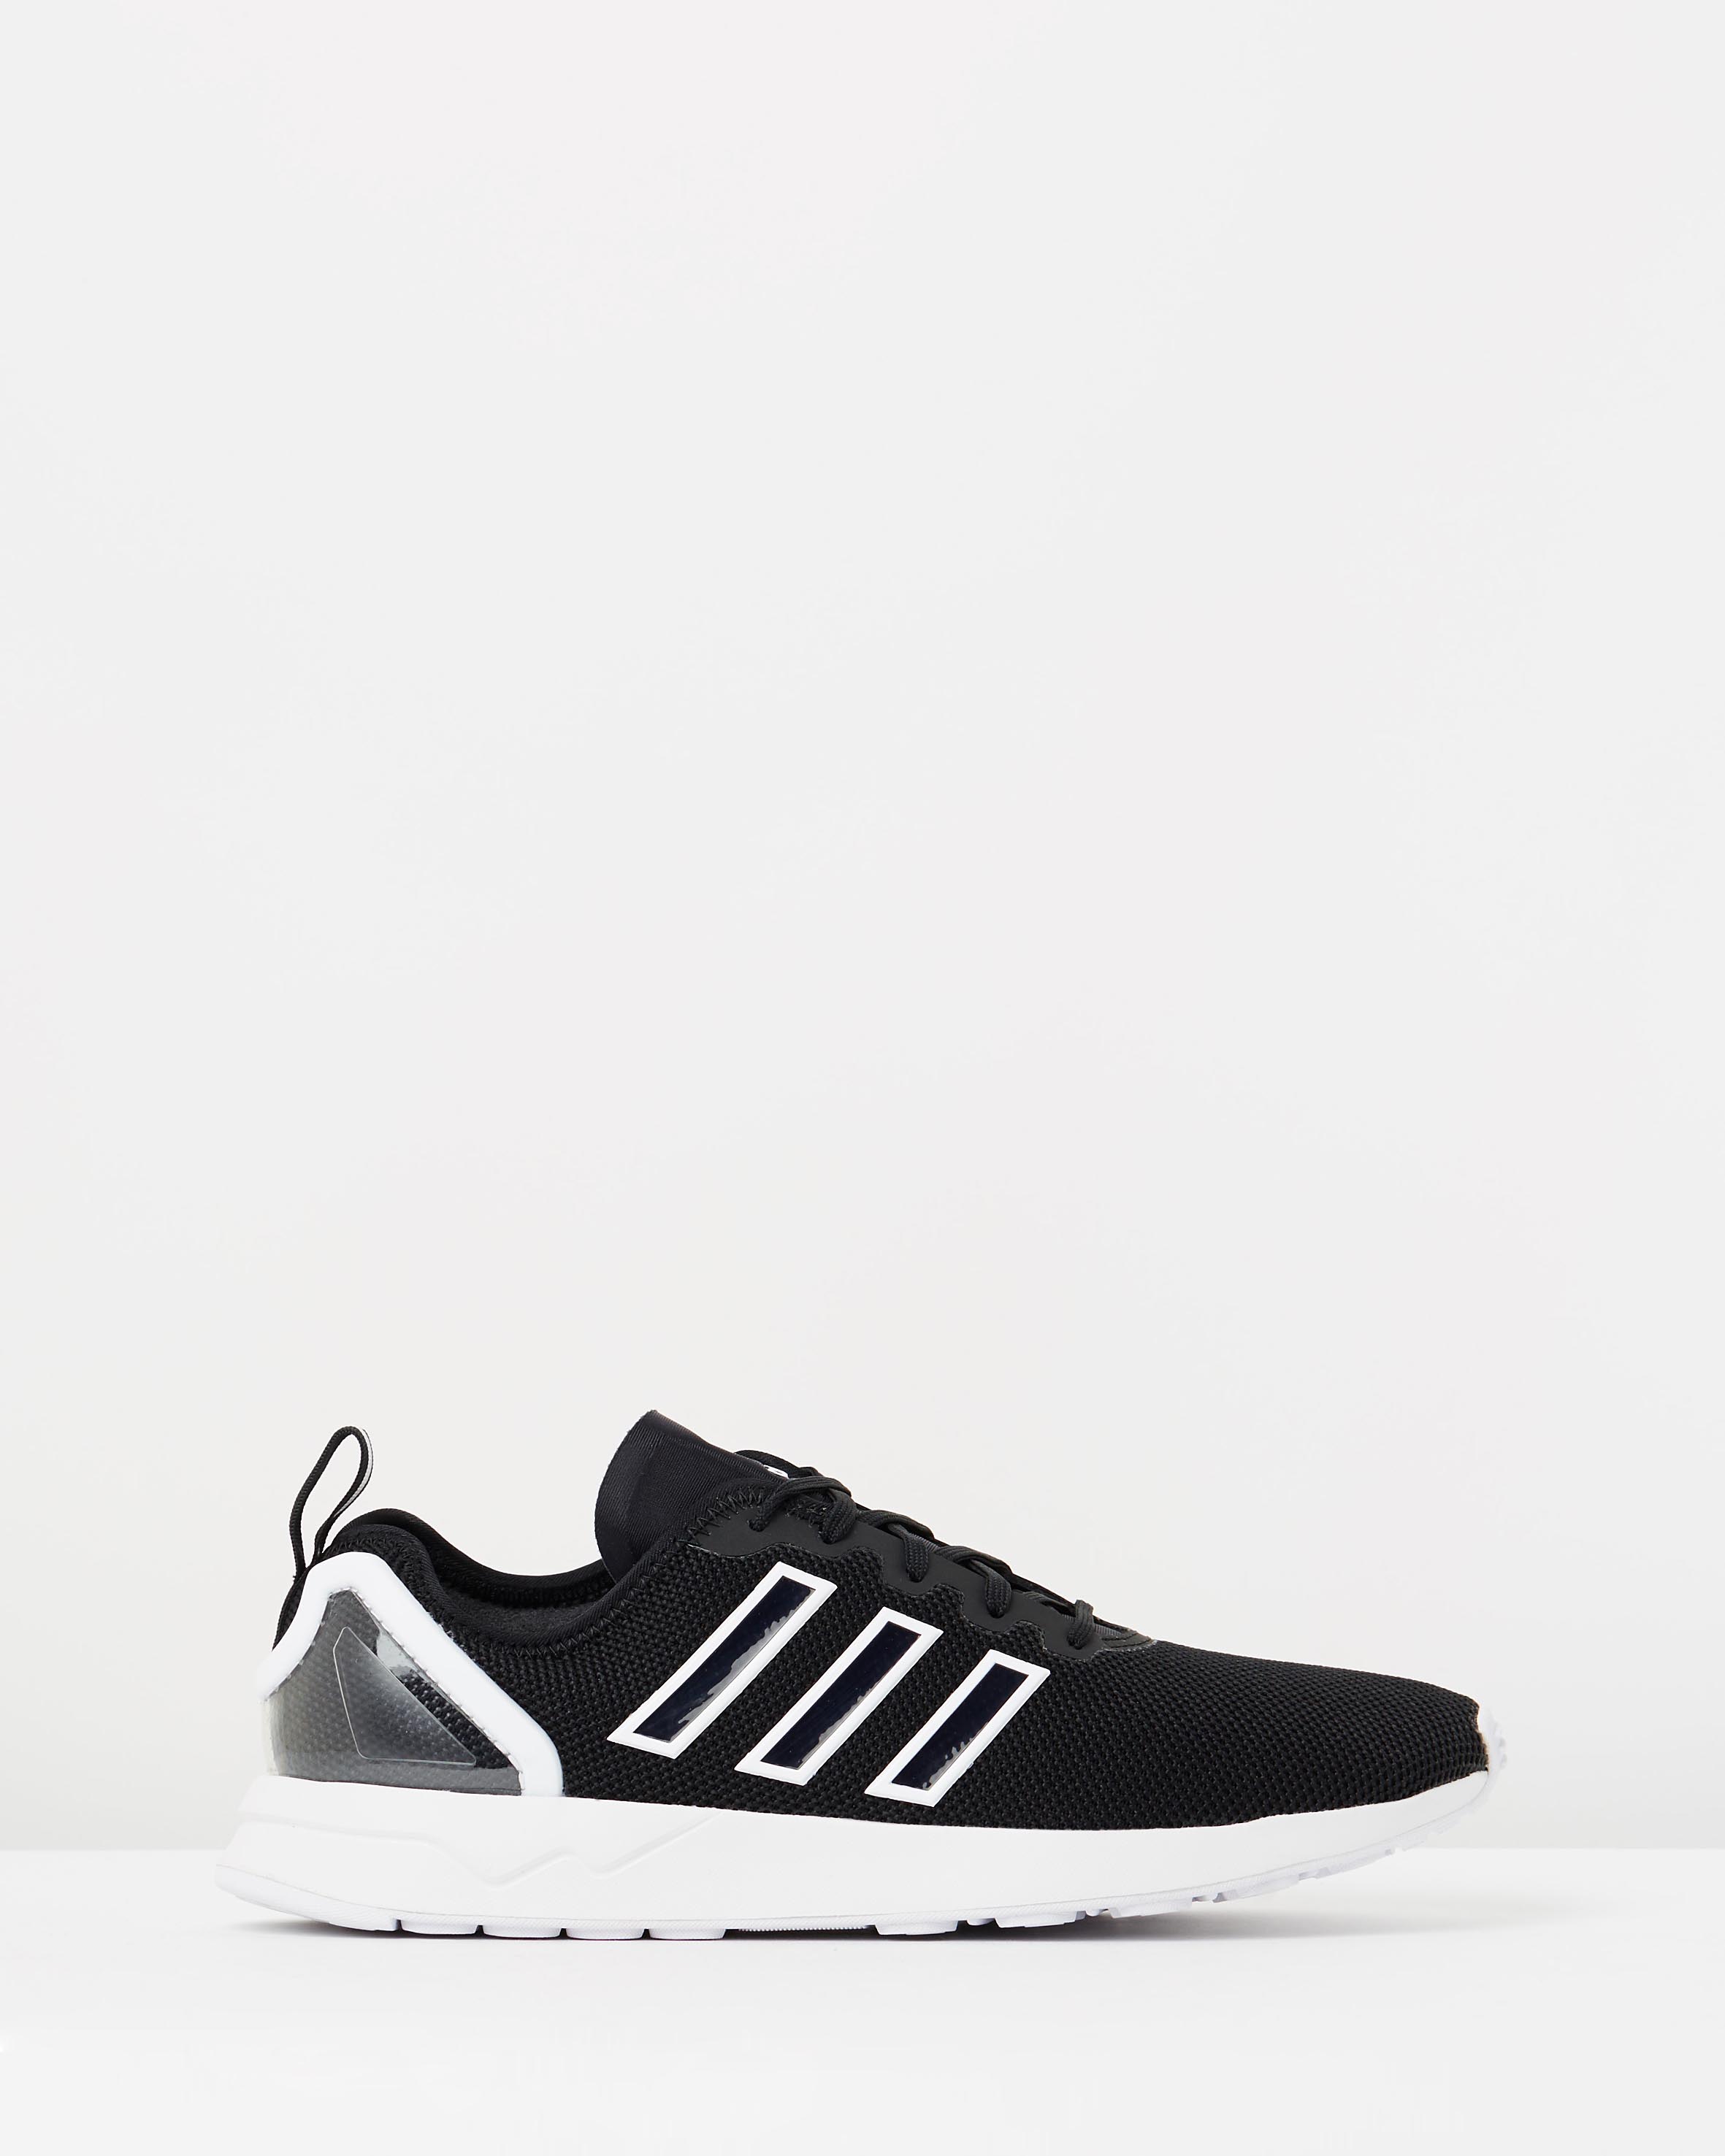 adidas zx flux racer black and white